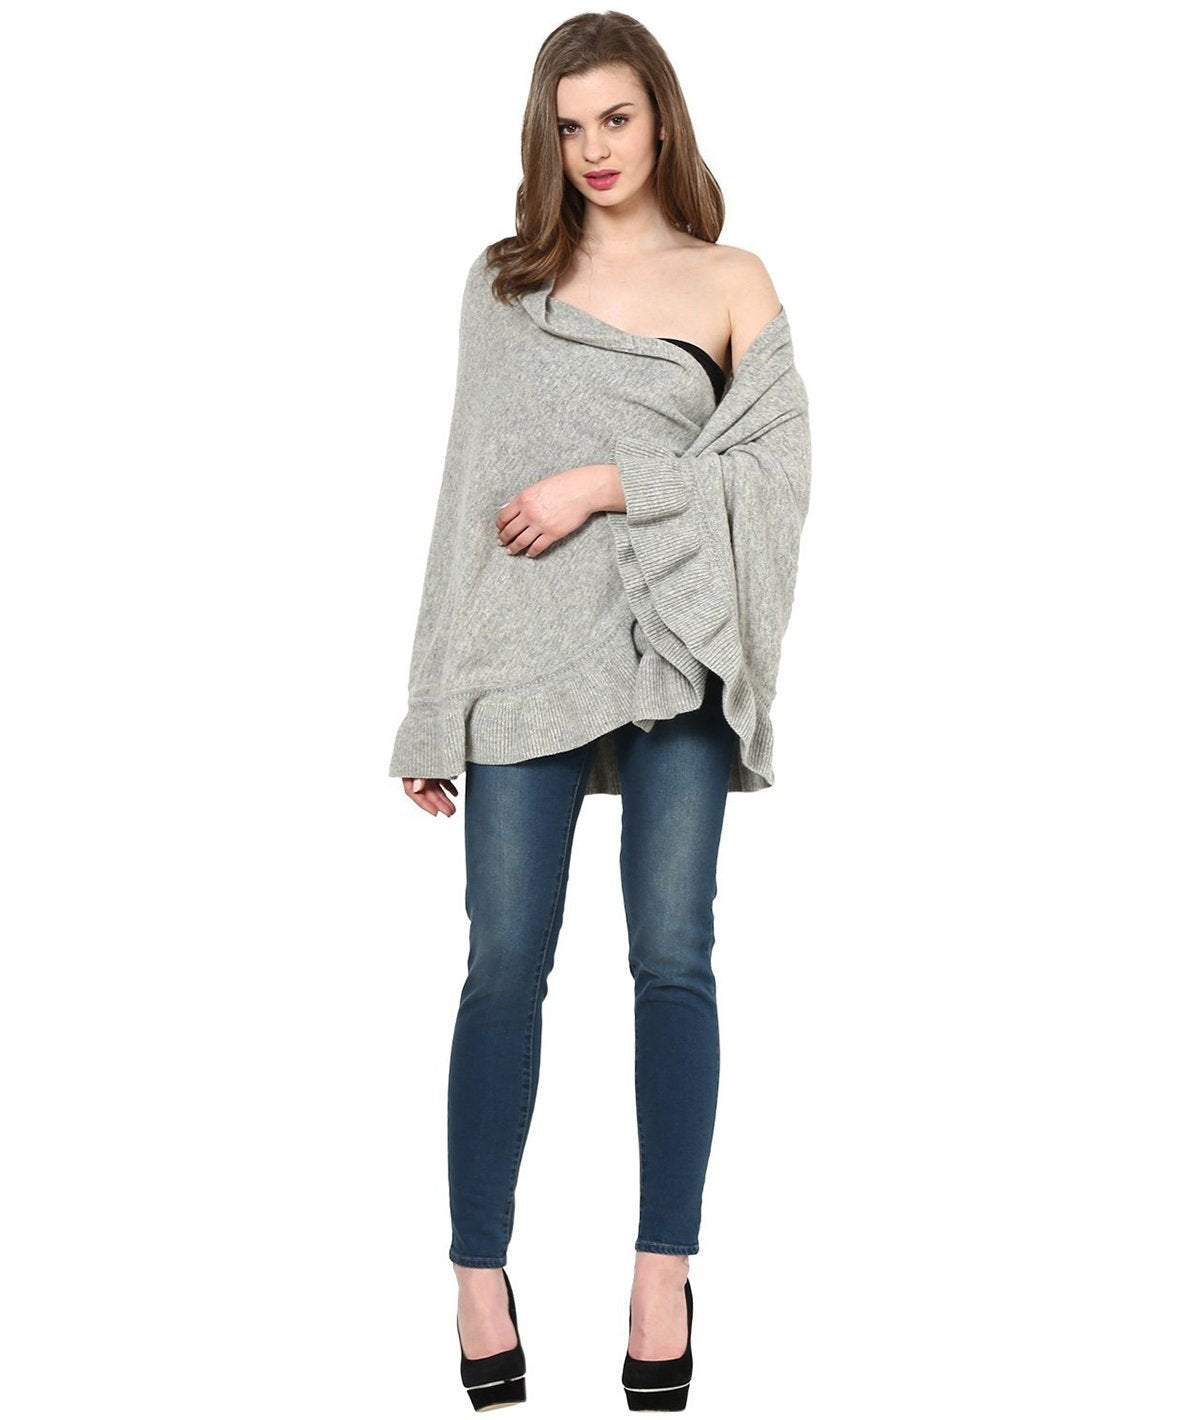 Daisy - Light Grey Lambswool & Nylon Knitted Fashion Poncho / Top / Cape